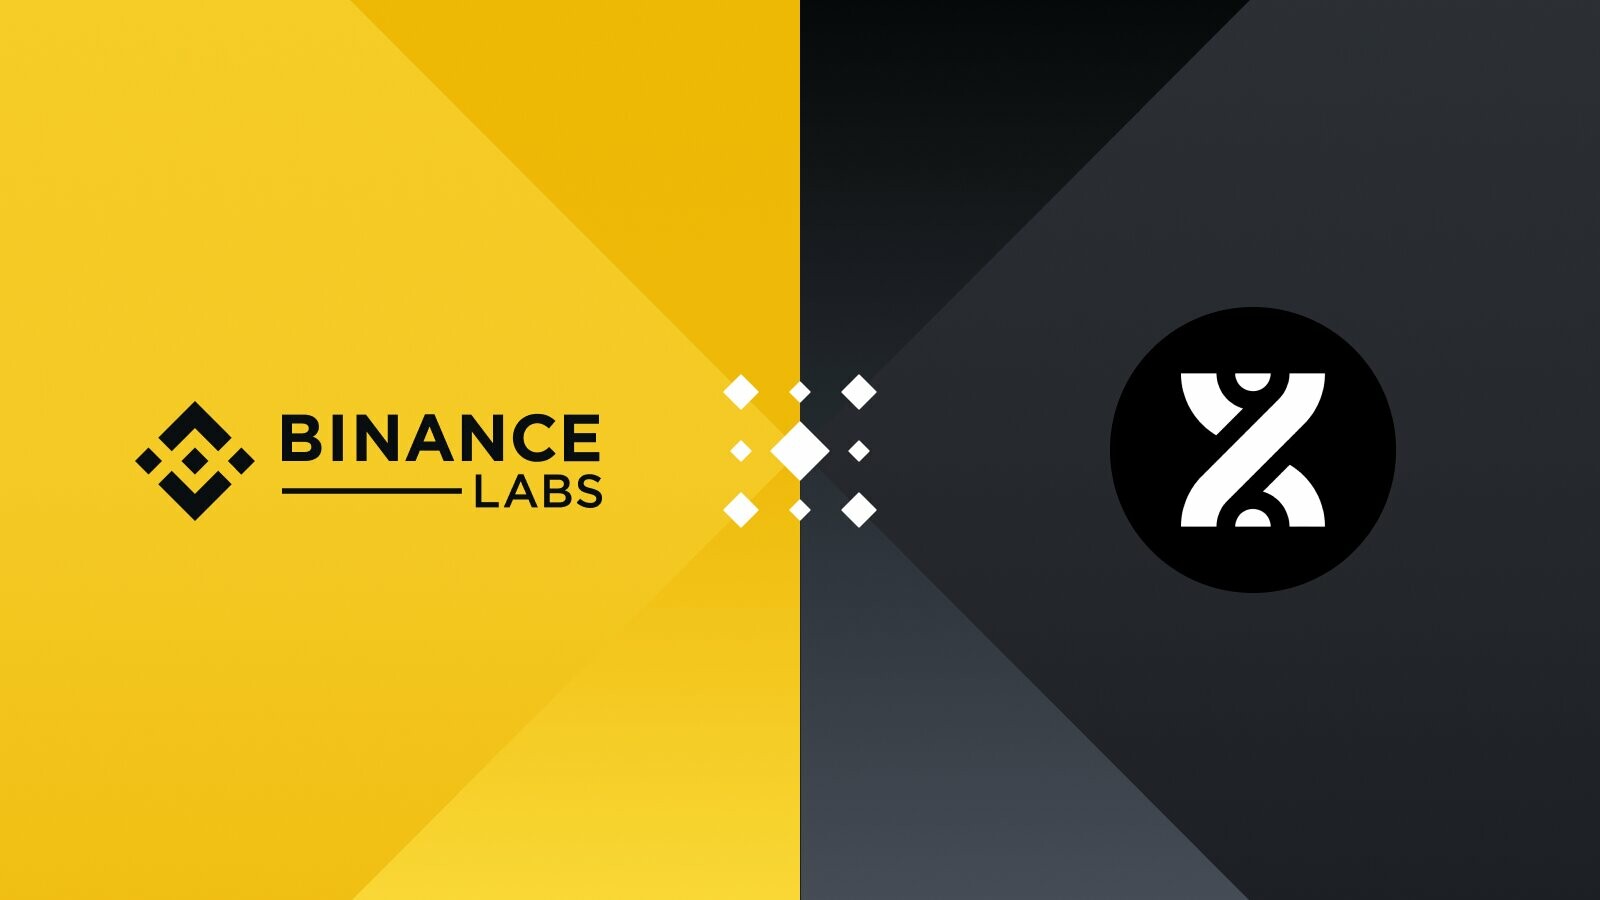 CRYPTONEWSBYTES.COM Binance-Labs-Invests-in-BounceBit-to-Enhance-Bitcoin-Utilization-Through-CeDeFi-Protocols Binance Labs Invests in BounceBit to Enhance Bitcoin Utilization Through CeDeFi Protocols  